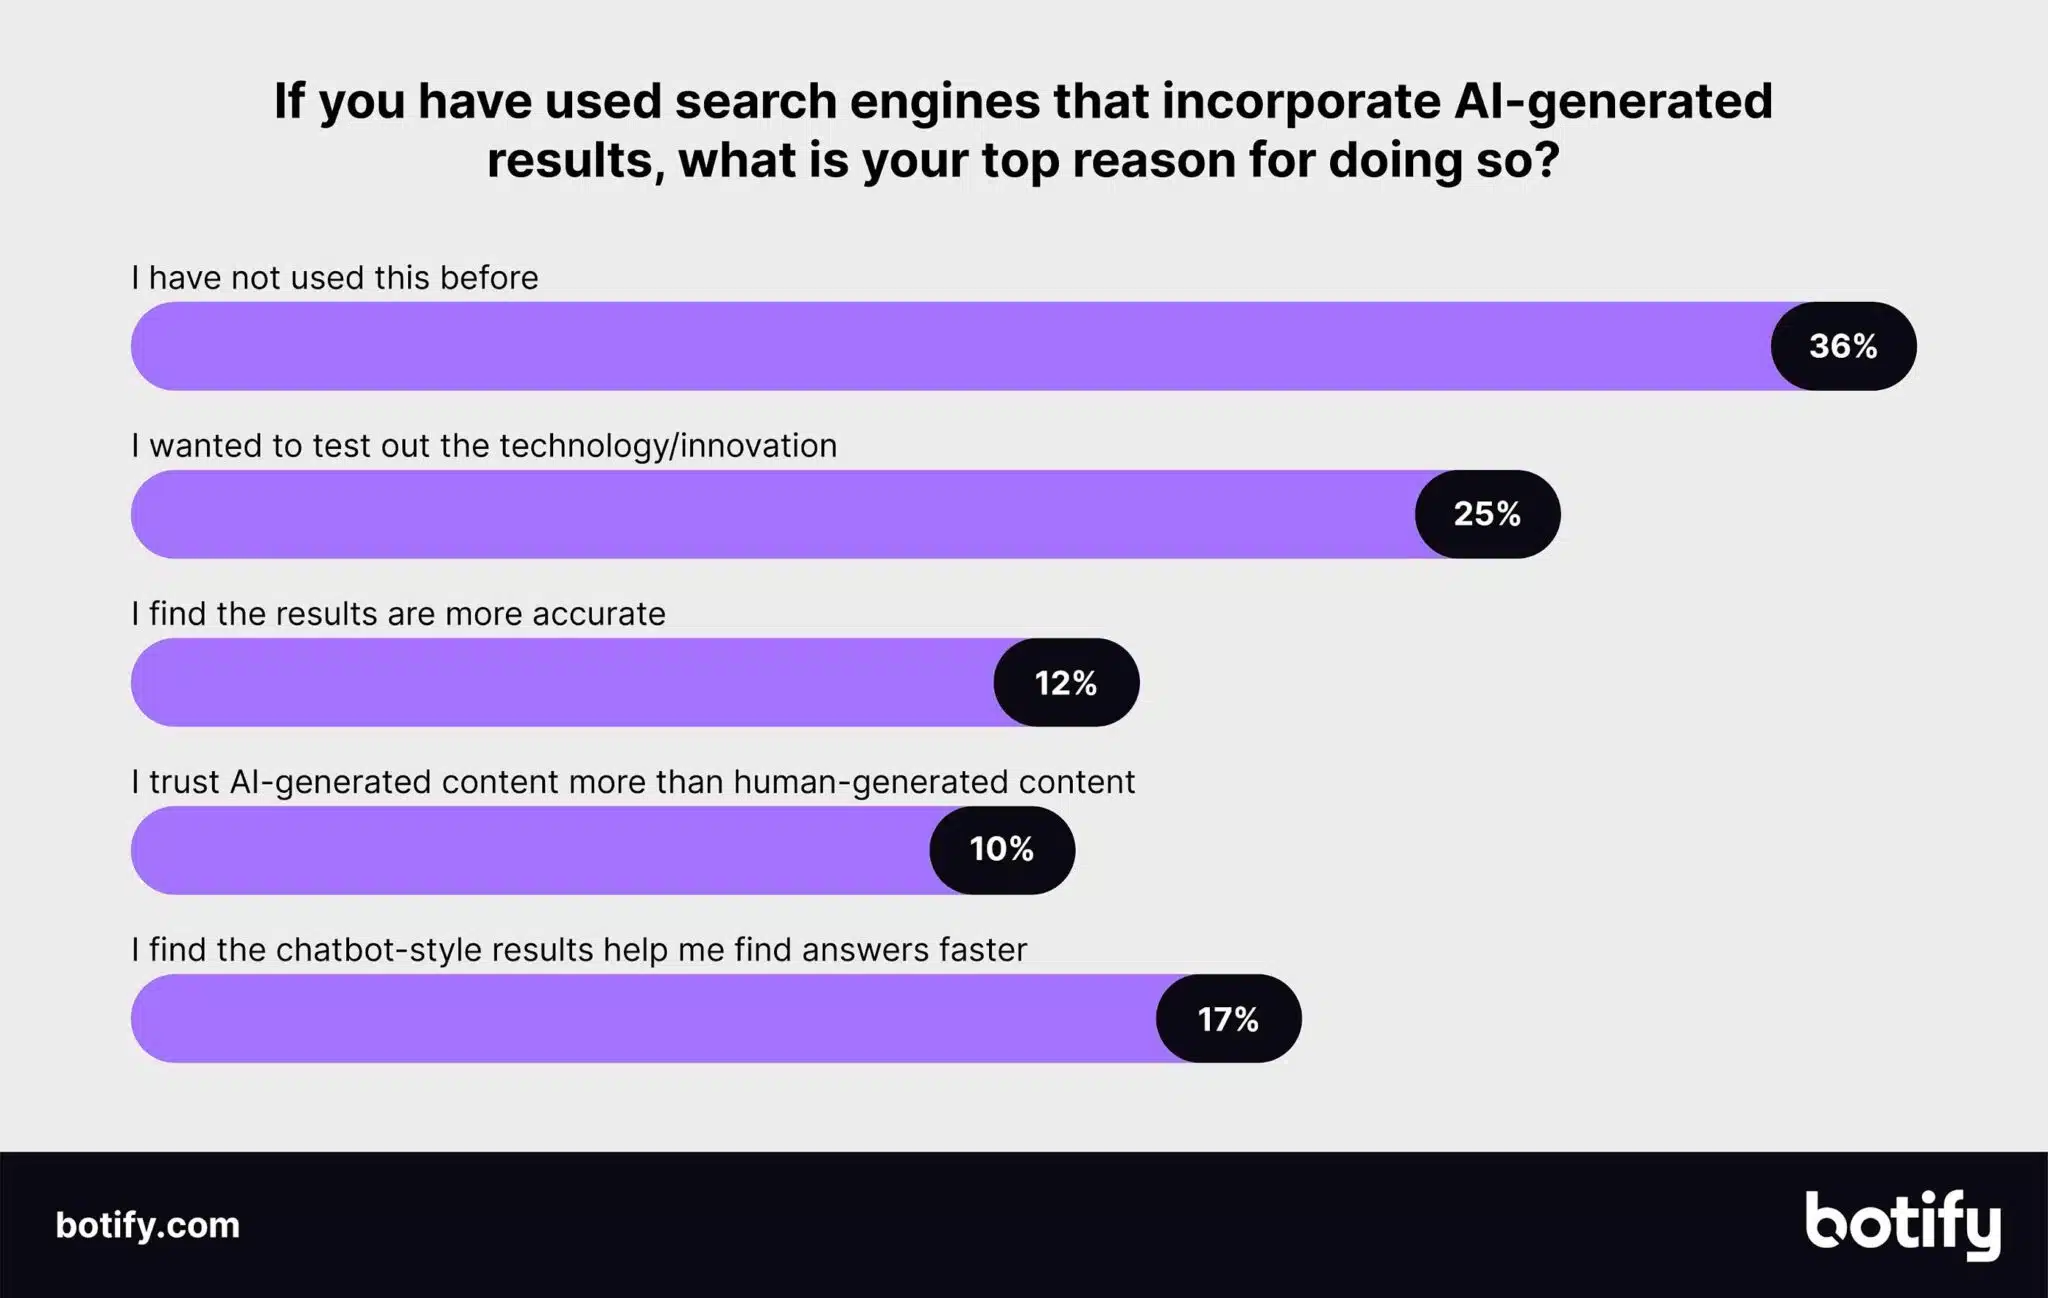 If you have used search engines that incorporate AI-generated results, what is your top reason for doing so?